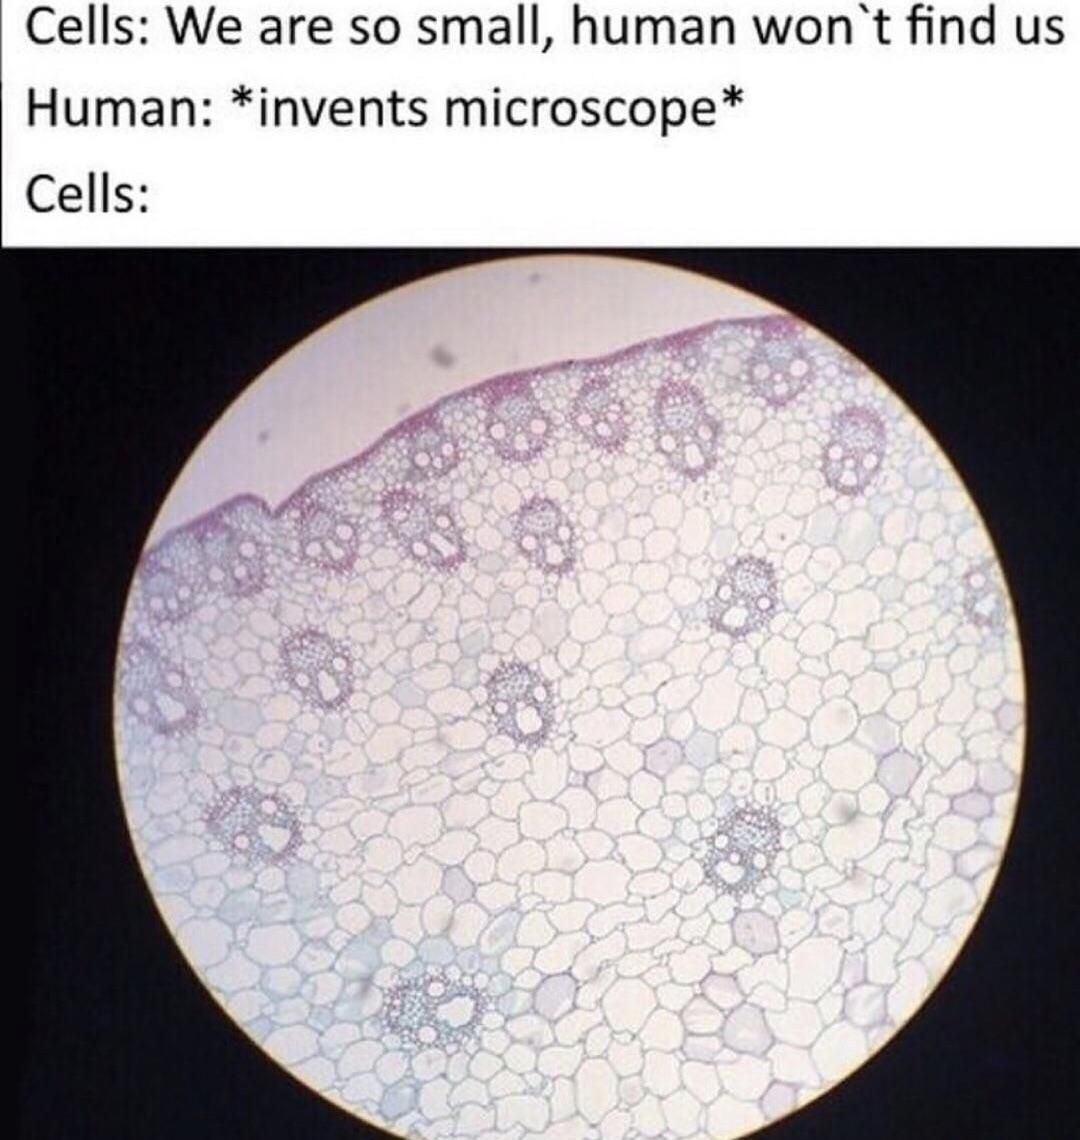 I’m a cell-out